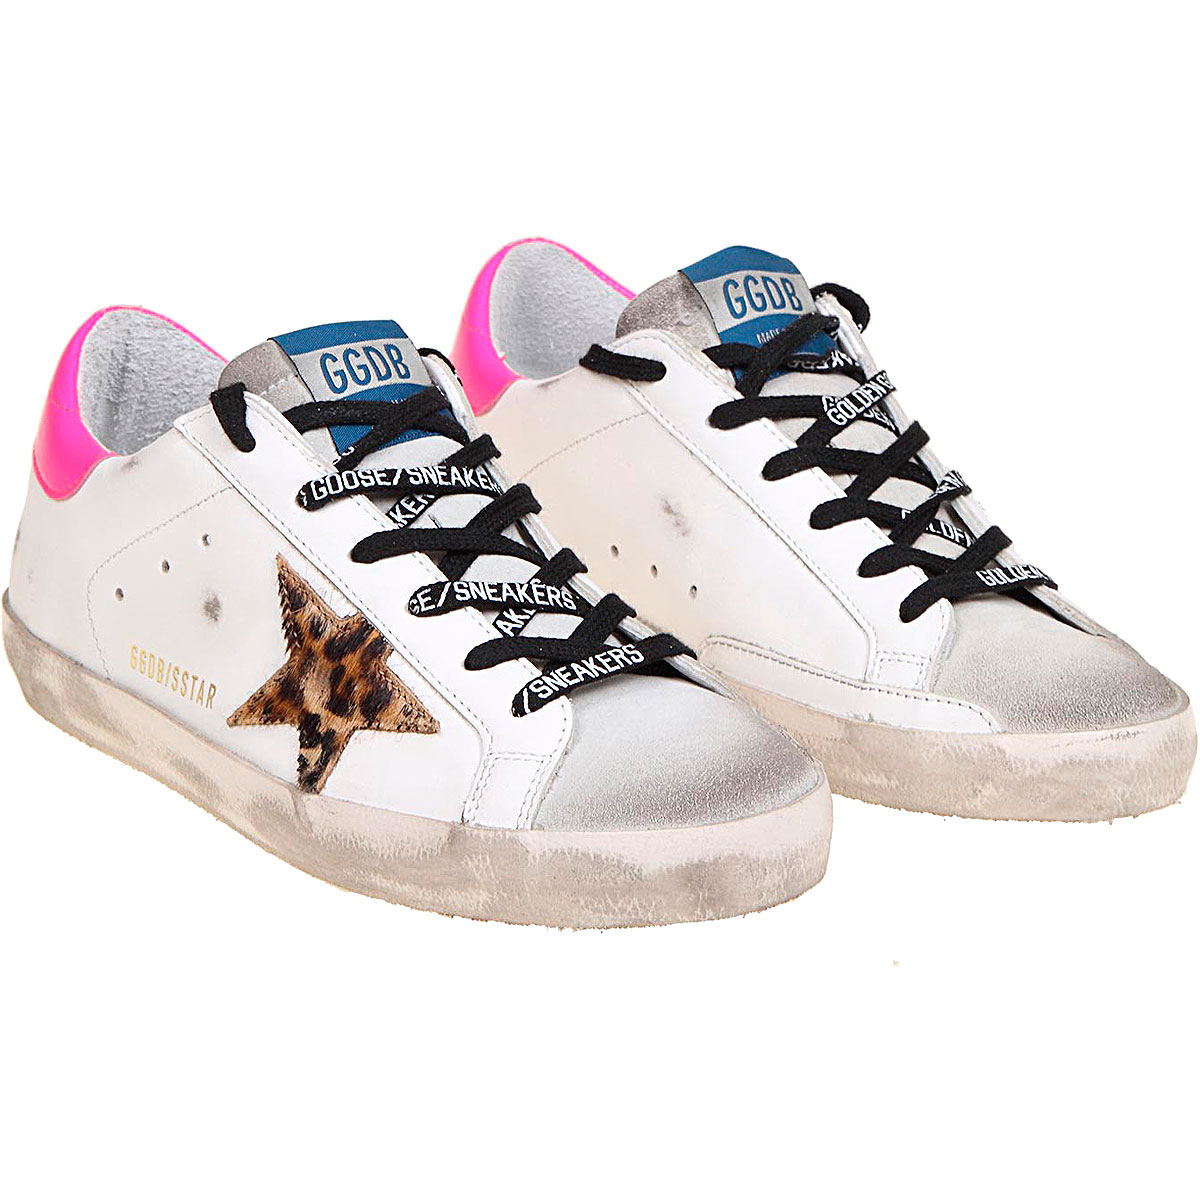 Womens Shoes Golden Goose, Style code gwf00101f00011580164